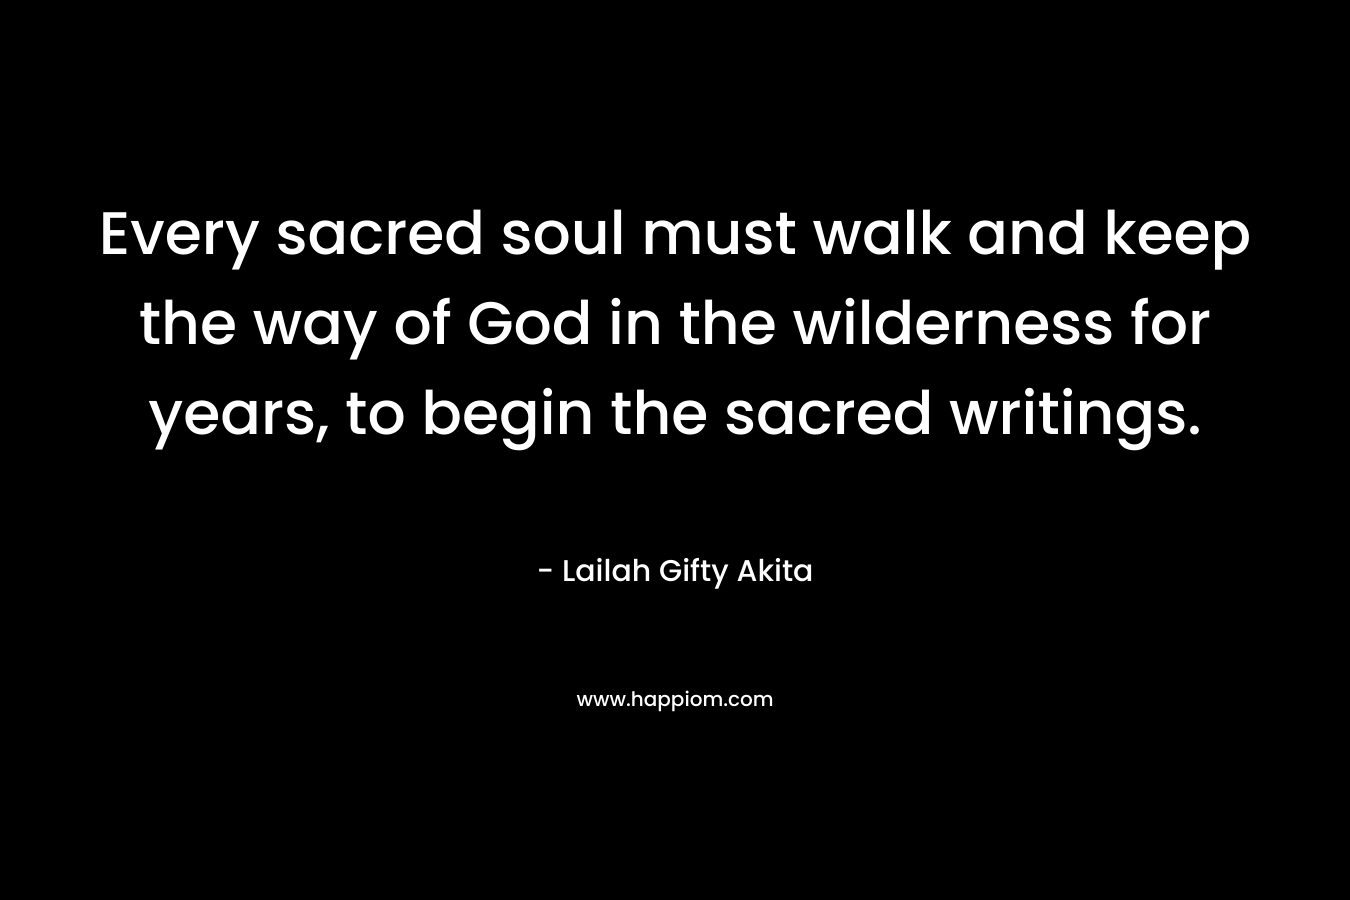 Every sacred soul must walk and keep the way of God in the wilderness for years, to begin the sacred writings.